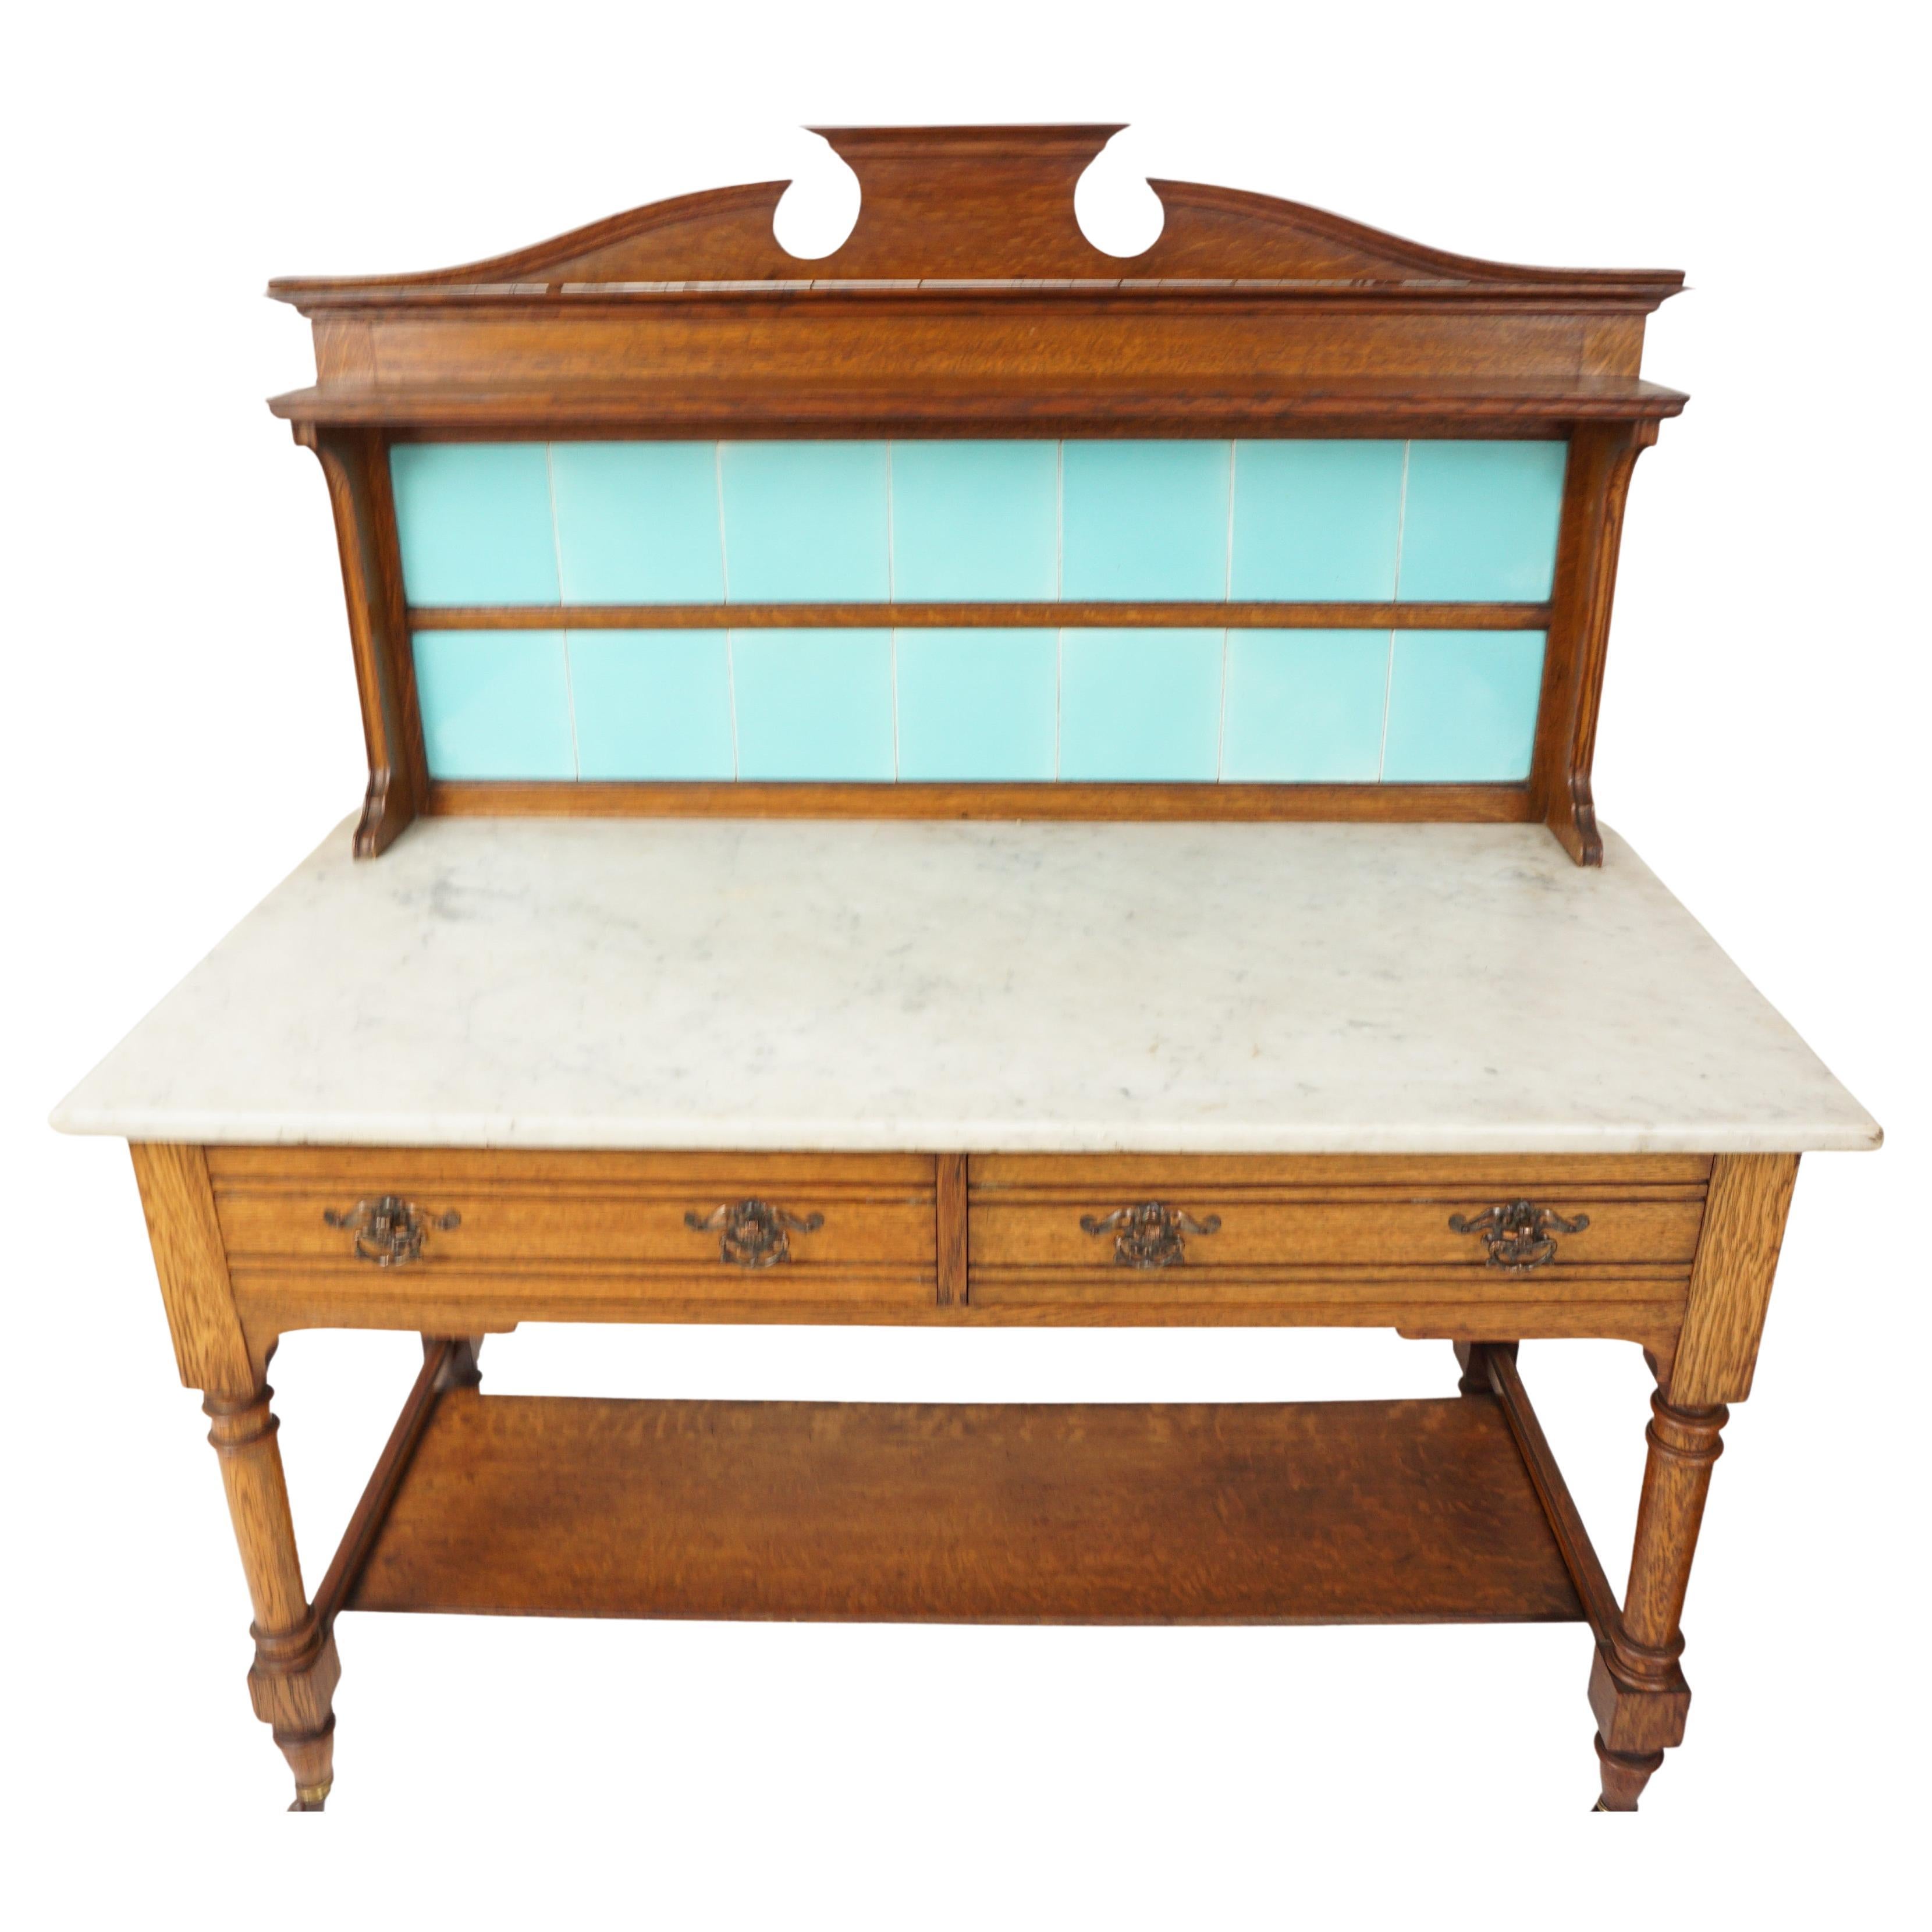 Aesthetic Oak Marble Top Washstand Maple & Co, England 1900, H540